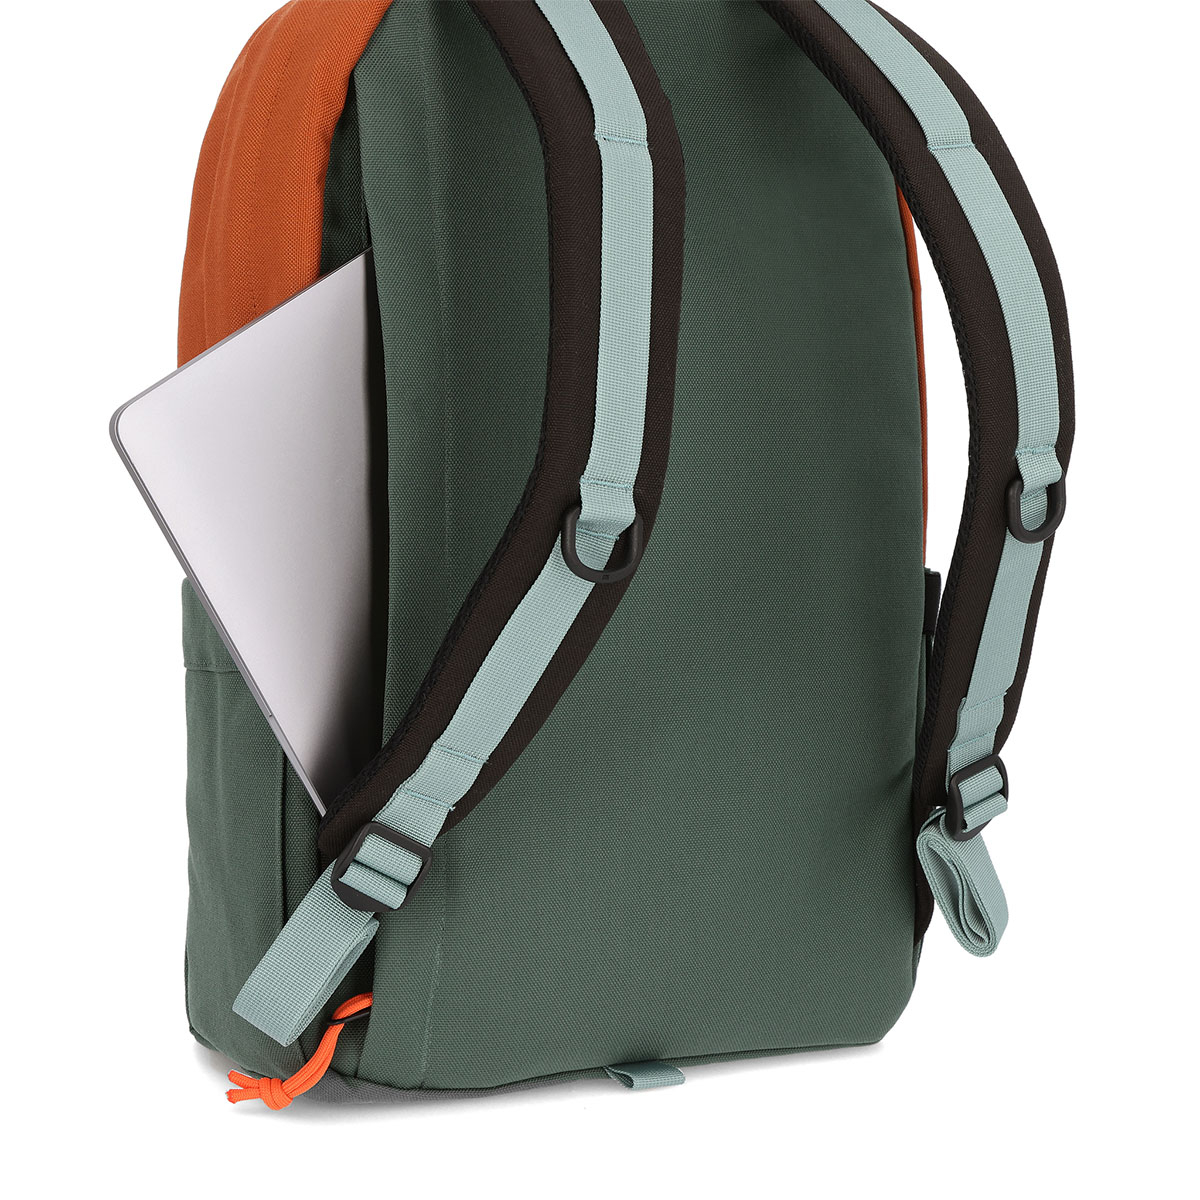 Topo Designs Daypack Classic Khaki/Forest/Clay, stylish and functional pack, ideal travel companion, schoolmate or pack mule